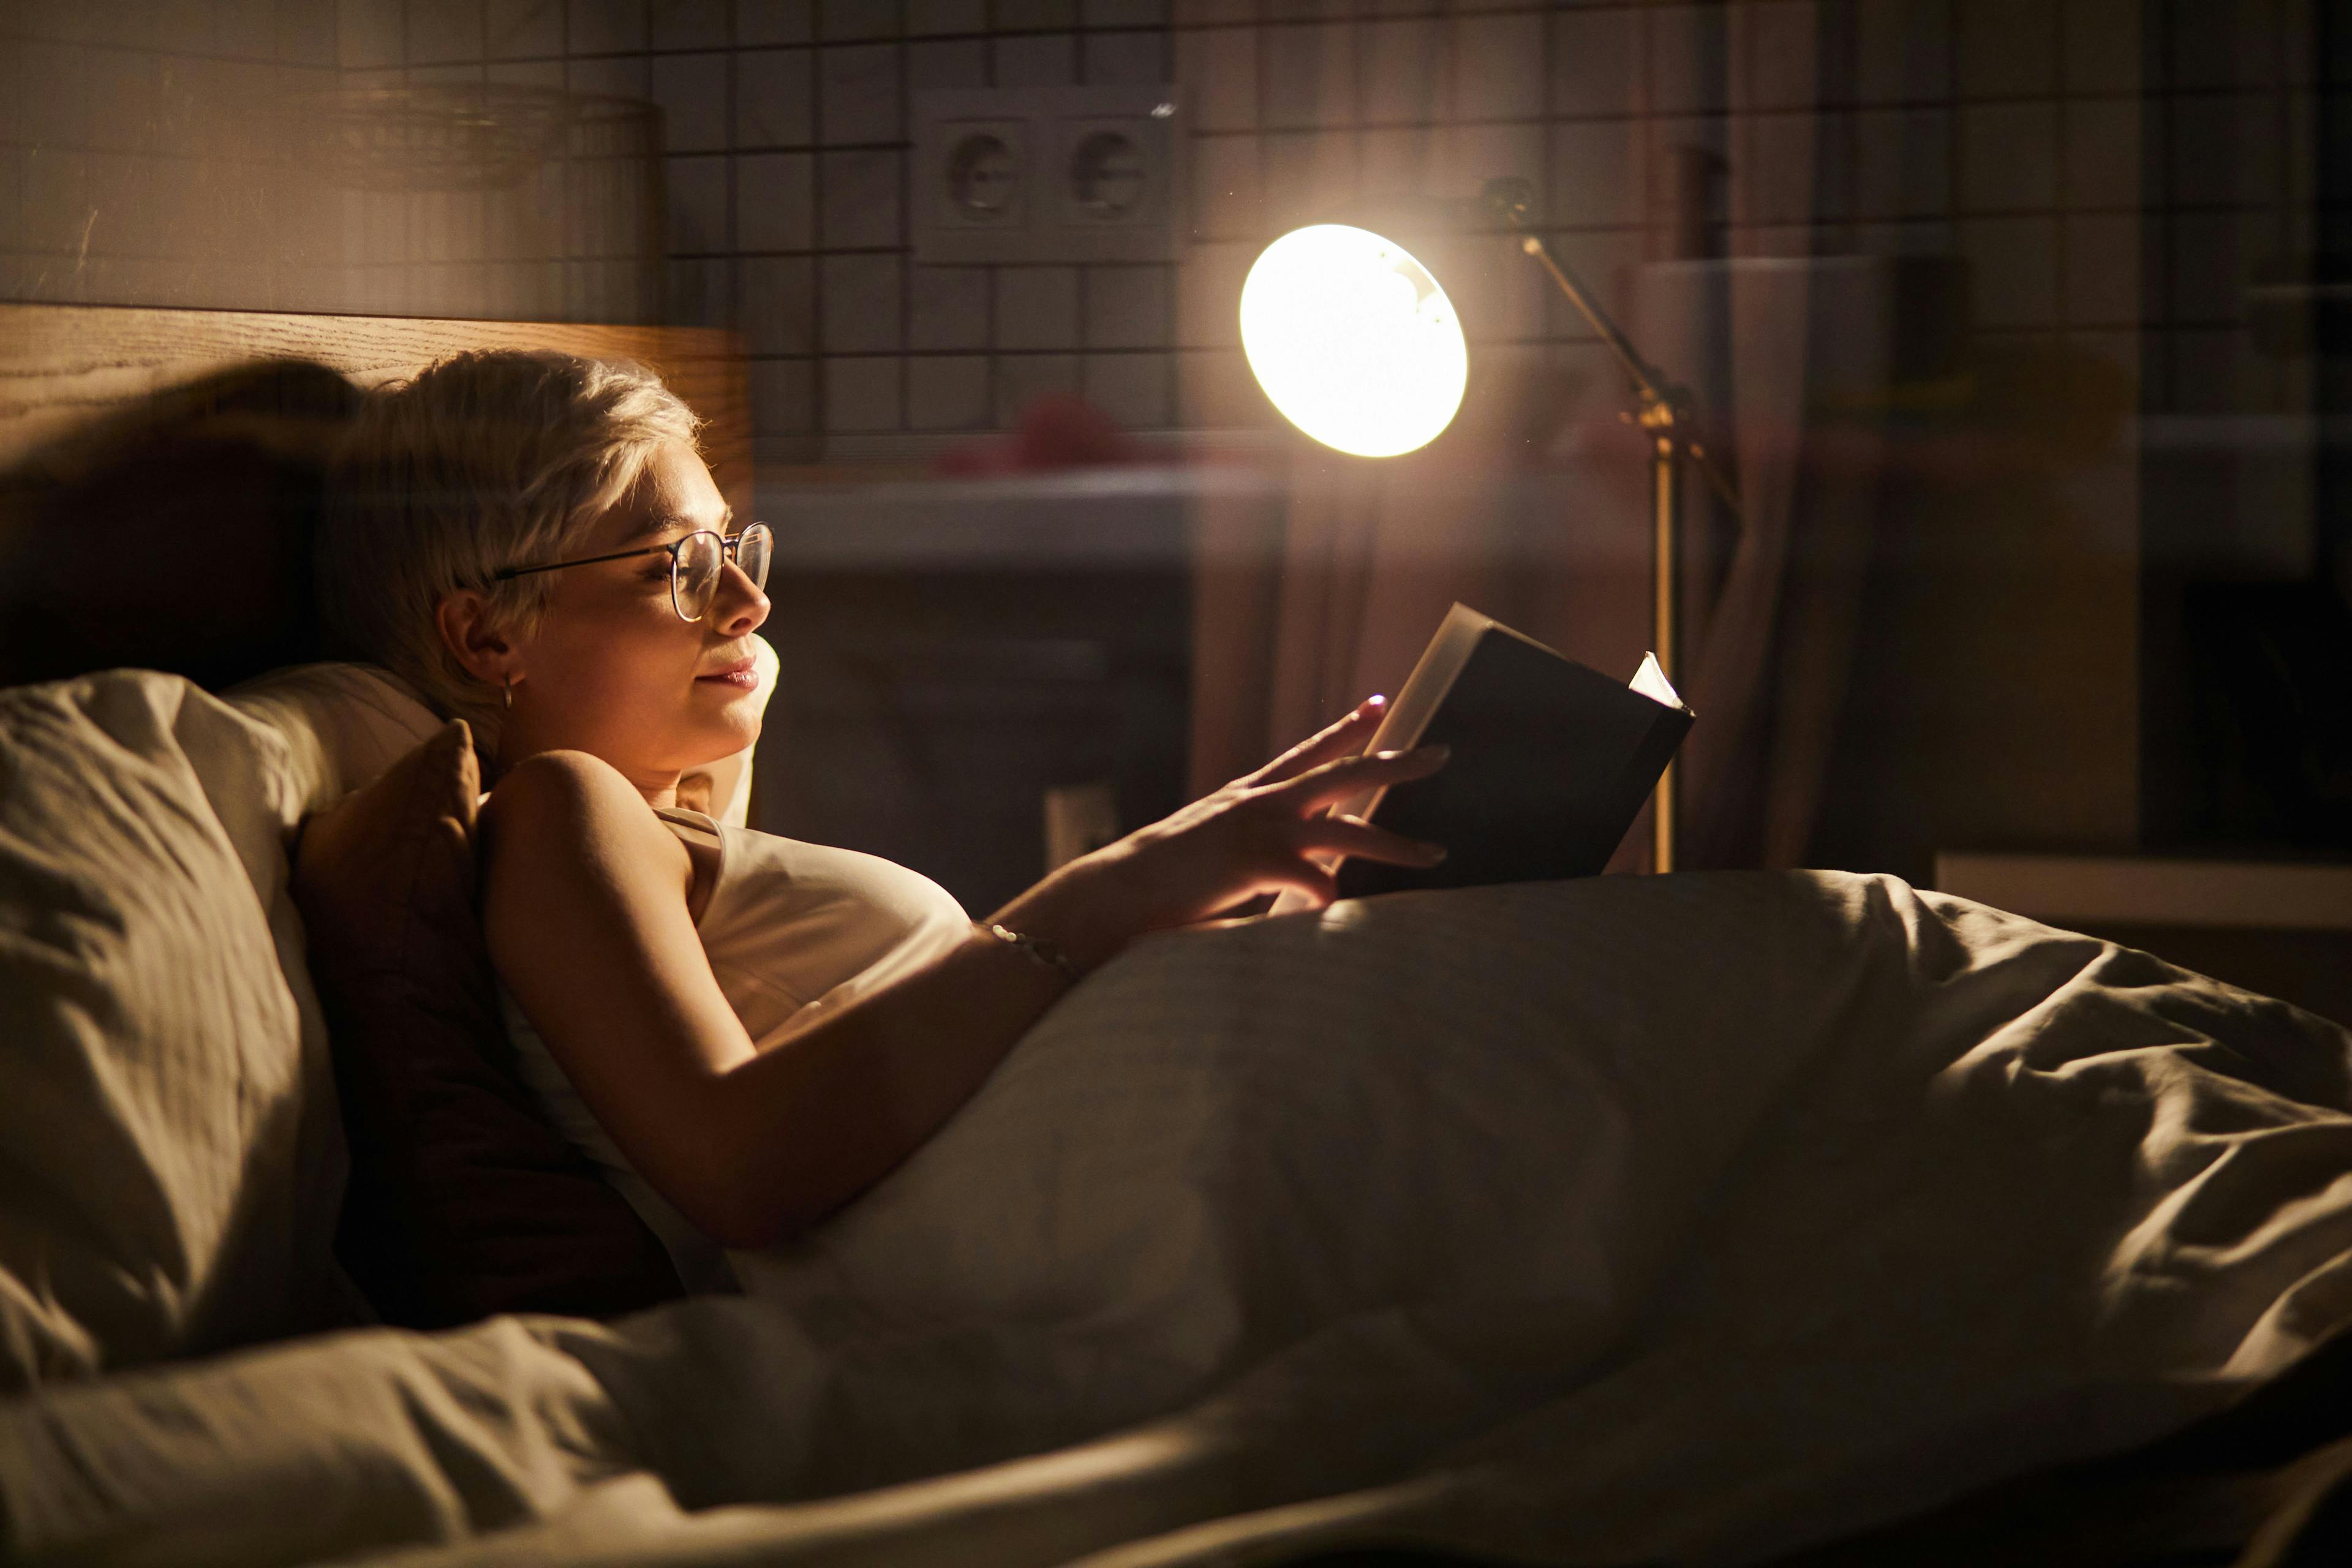 Image of woman reading in bed